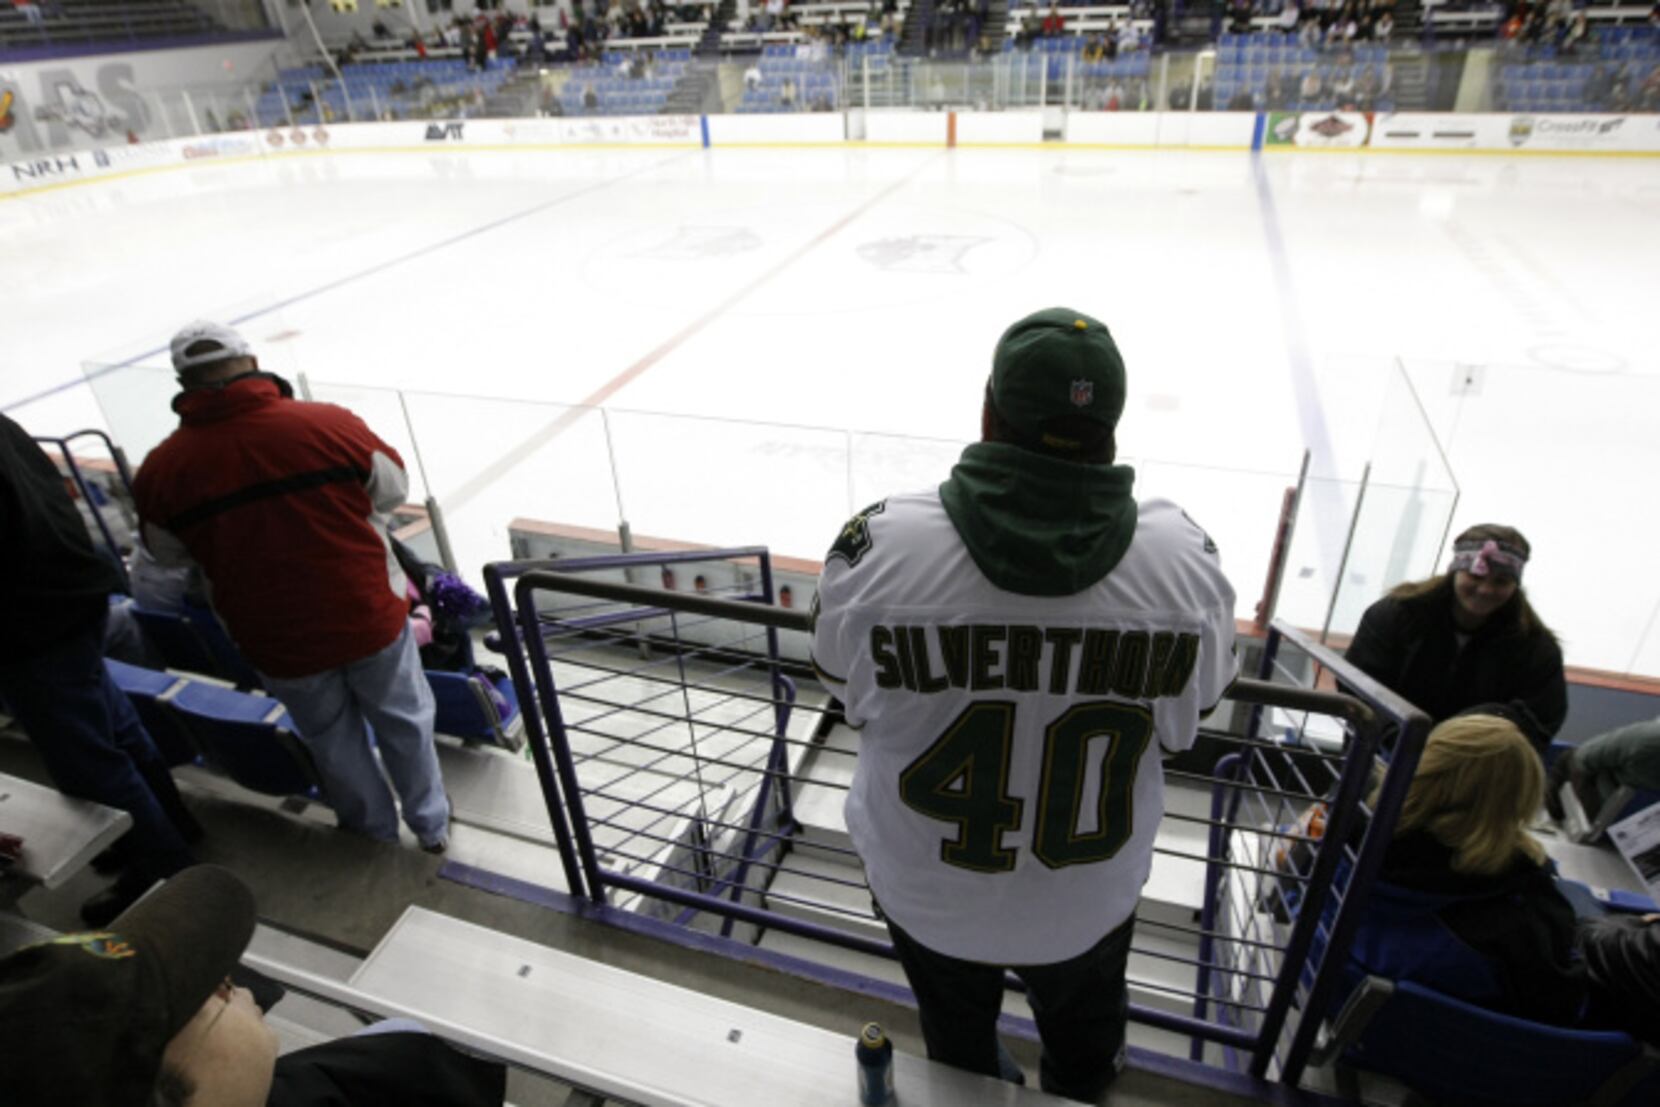 NHL Lockout 2012: Fans Will Still Come Back If NHL Cancels Entire